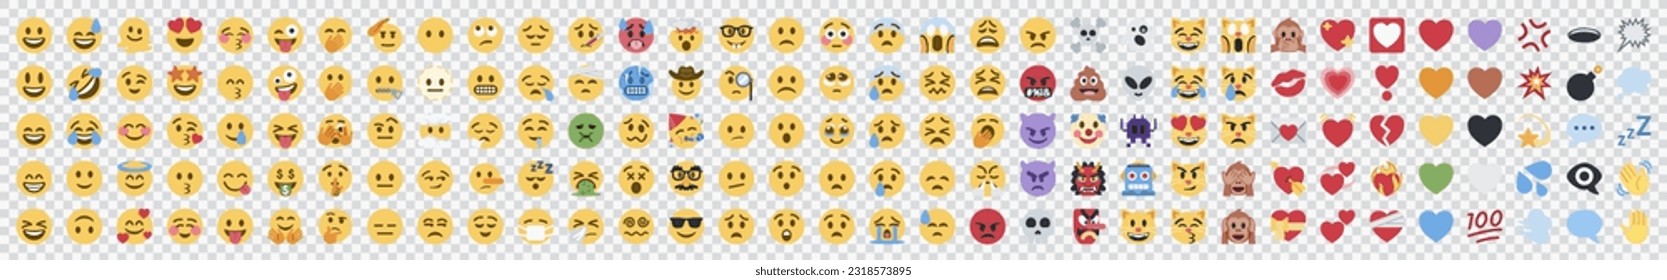 Big set of iOS emoji. Funny emoticons faces with facial expressions. Full editable vector icons. iOS emoji. Detailed emoji icon from the WhatsApp, Facebook, twitter. On transparent background. svg